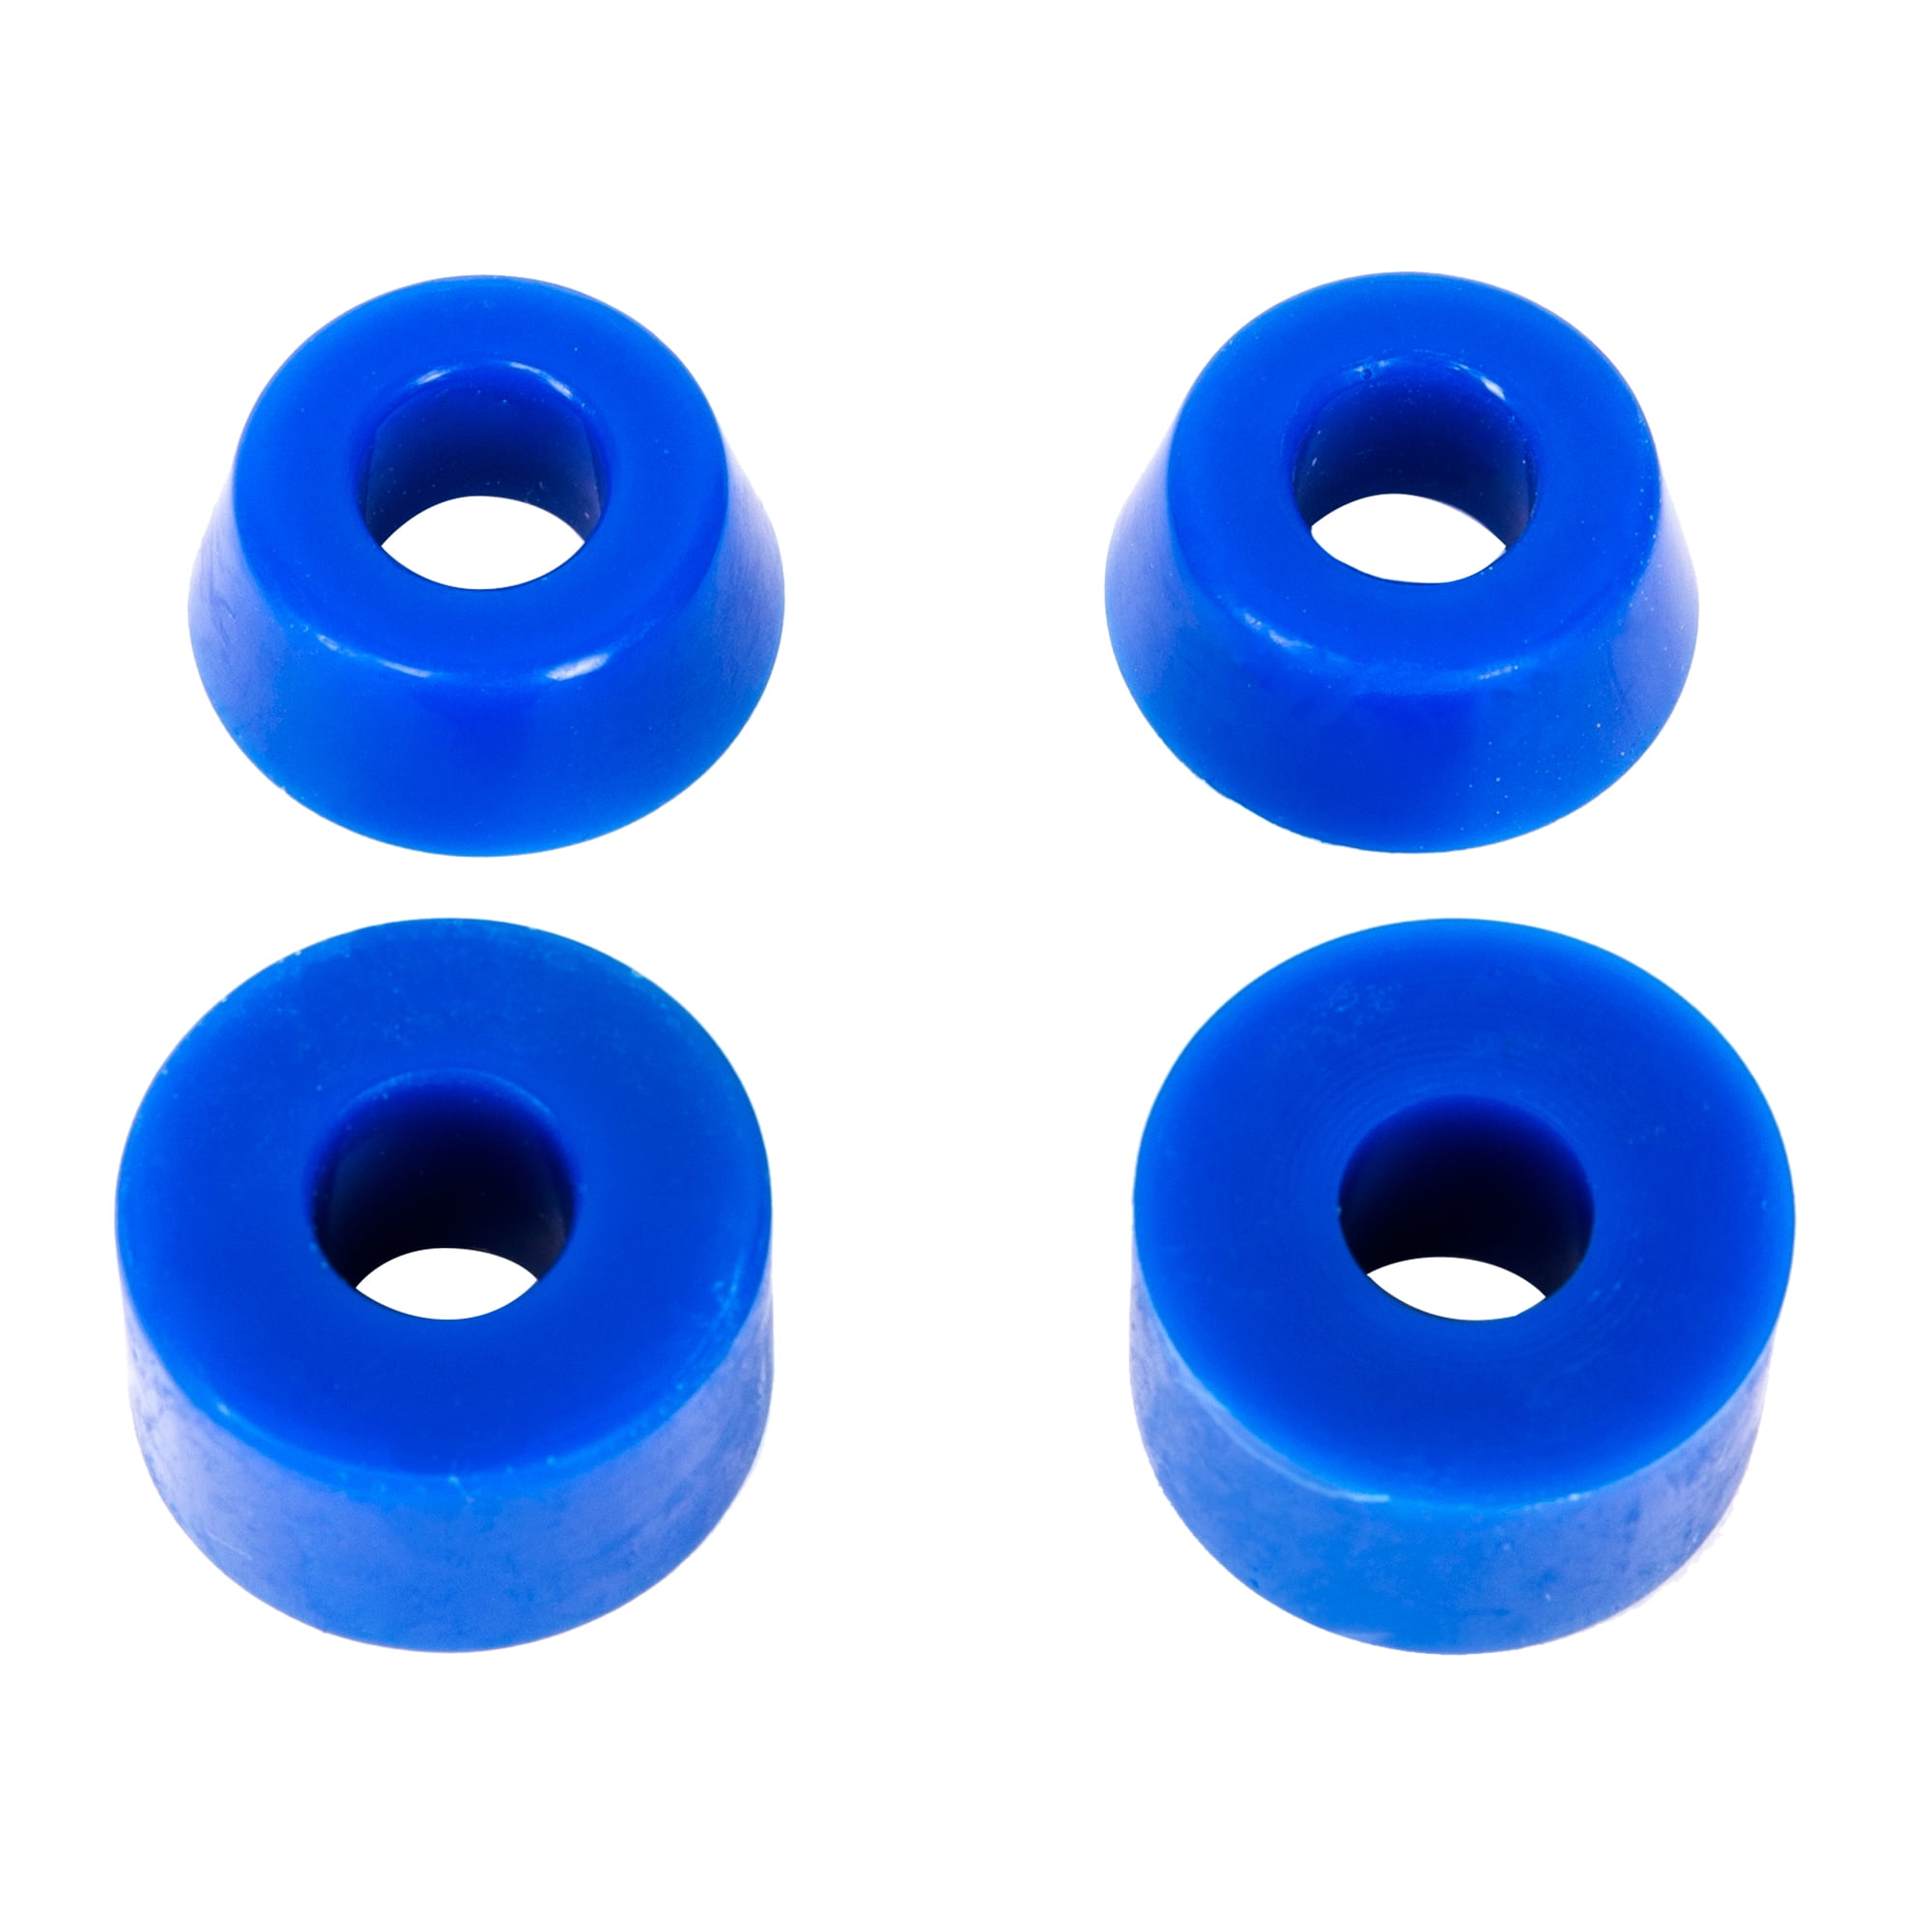 Skateboard Longboard Truck Replacement Bushings 4-pack for 2 Trucks Many and for sale online